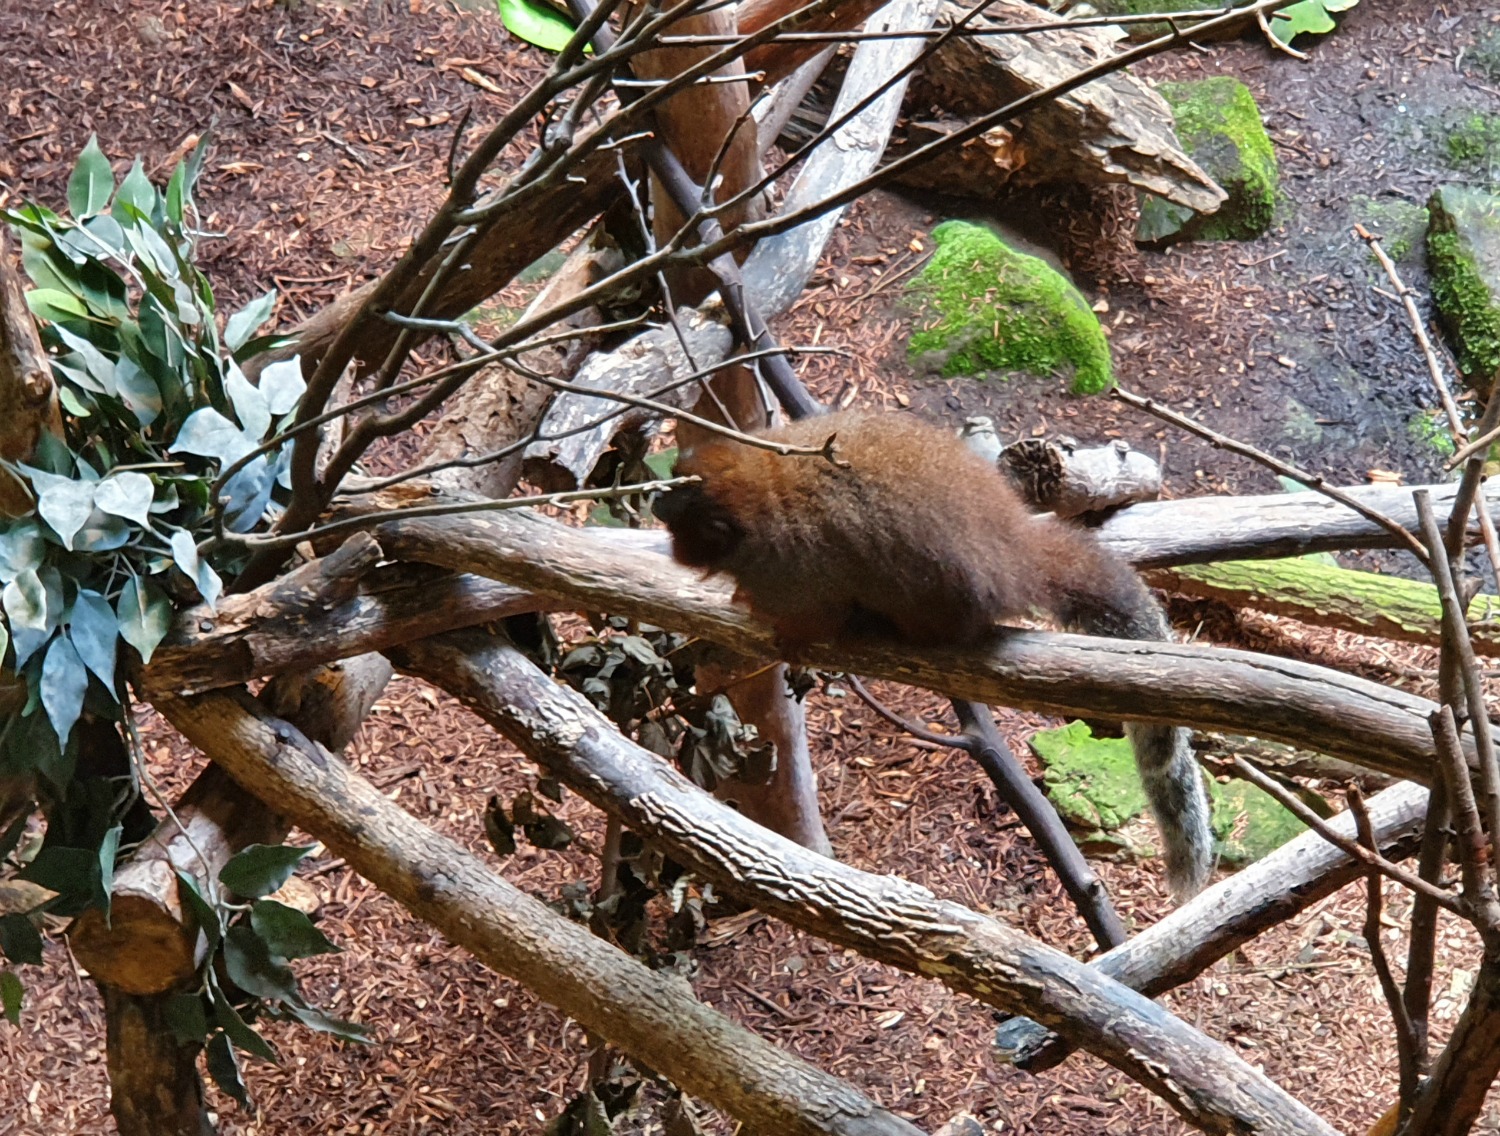 One of the inhabitants of the Rainforest exoerience enclosure at London Zoo